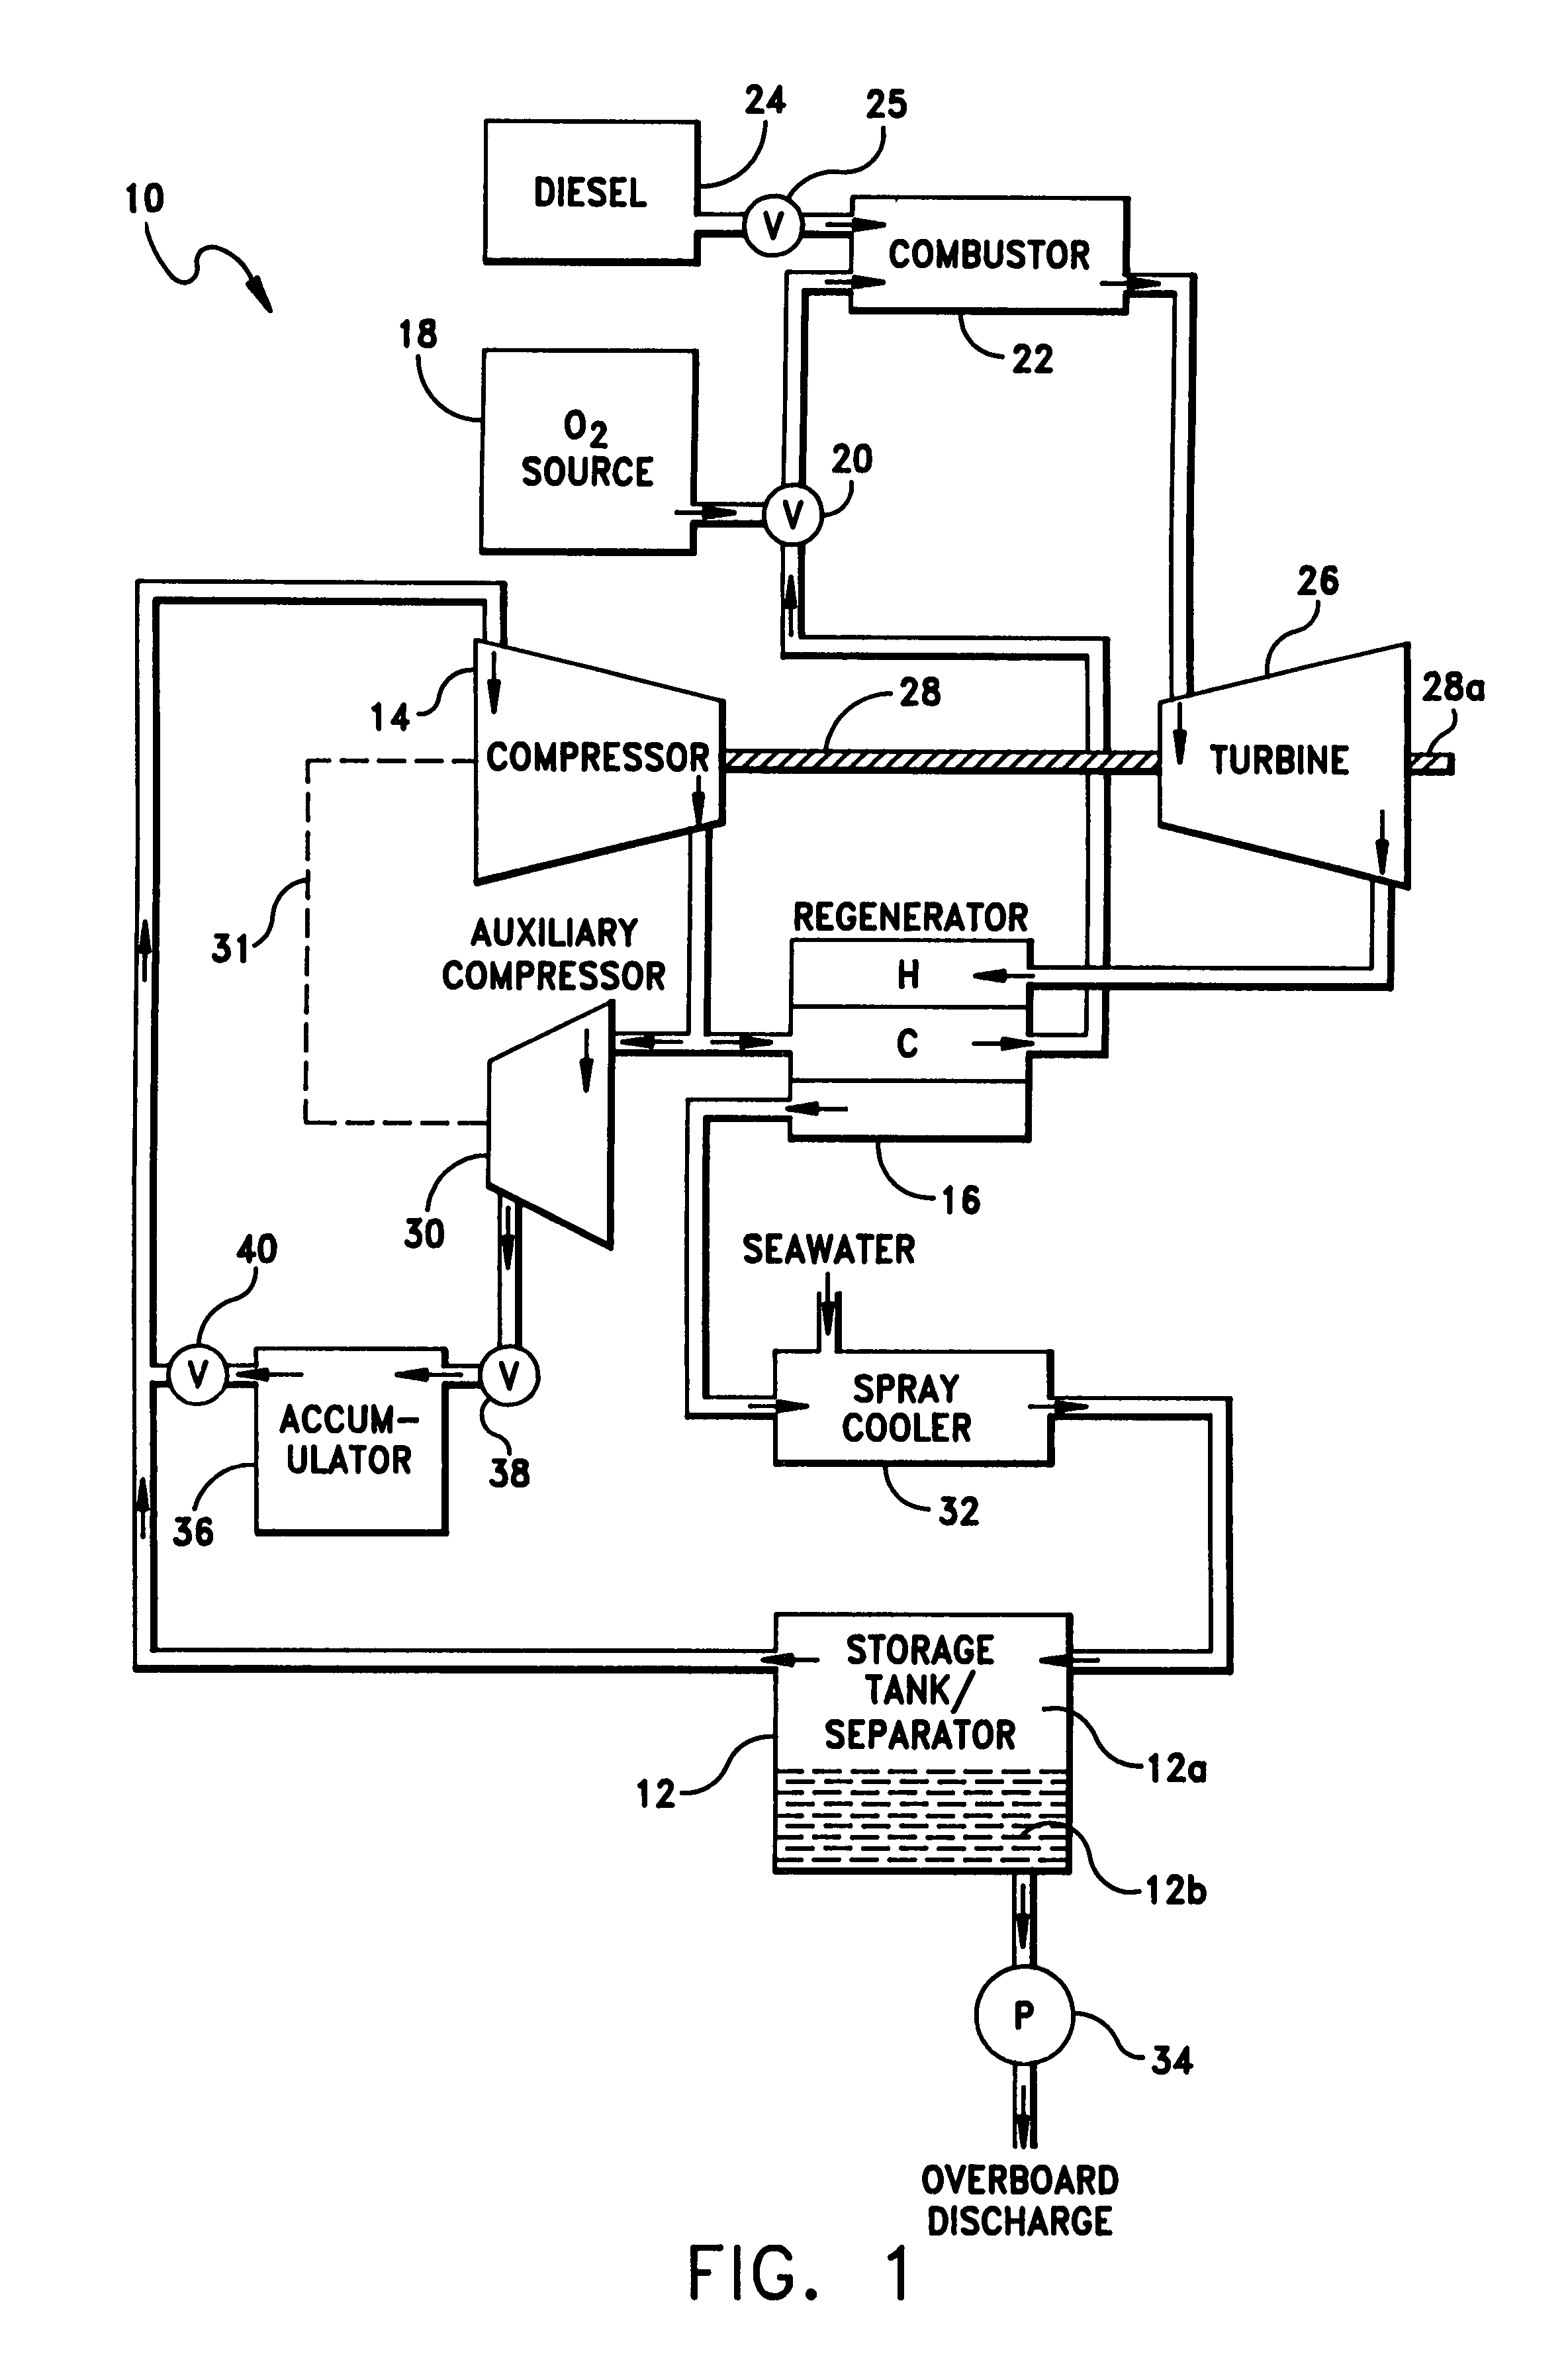 Semiclosed Brayton cycle power system with direct heat transfer